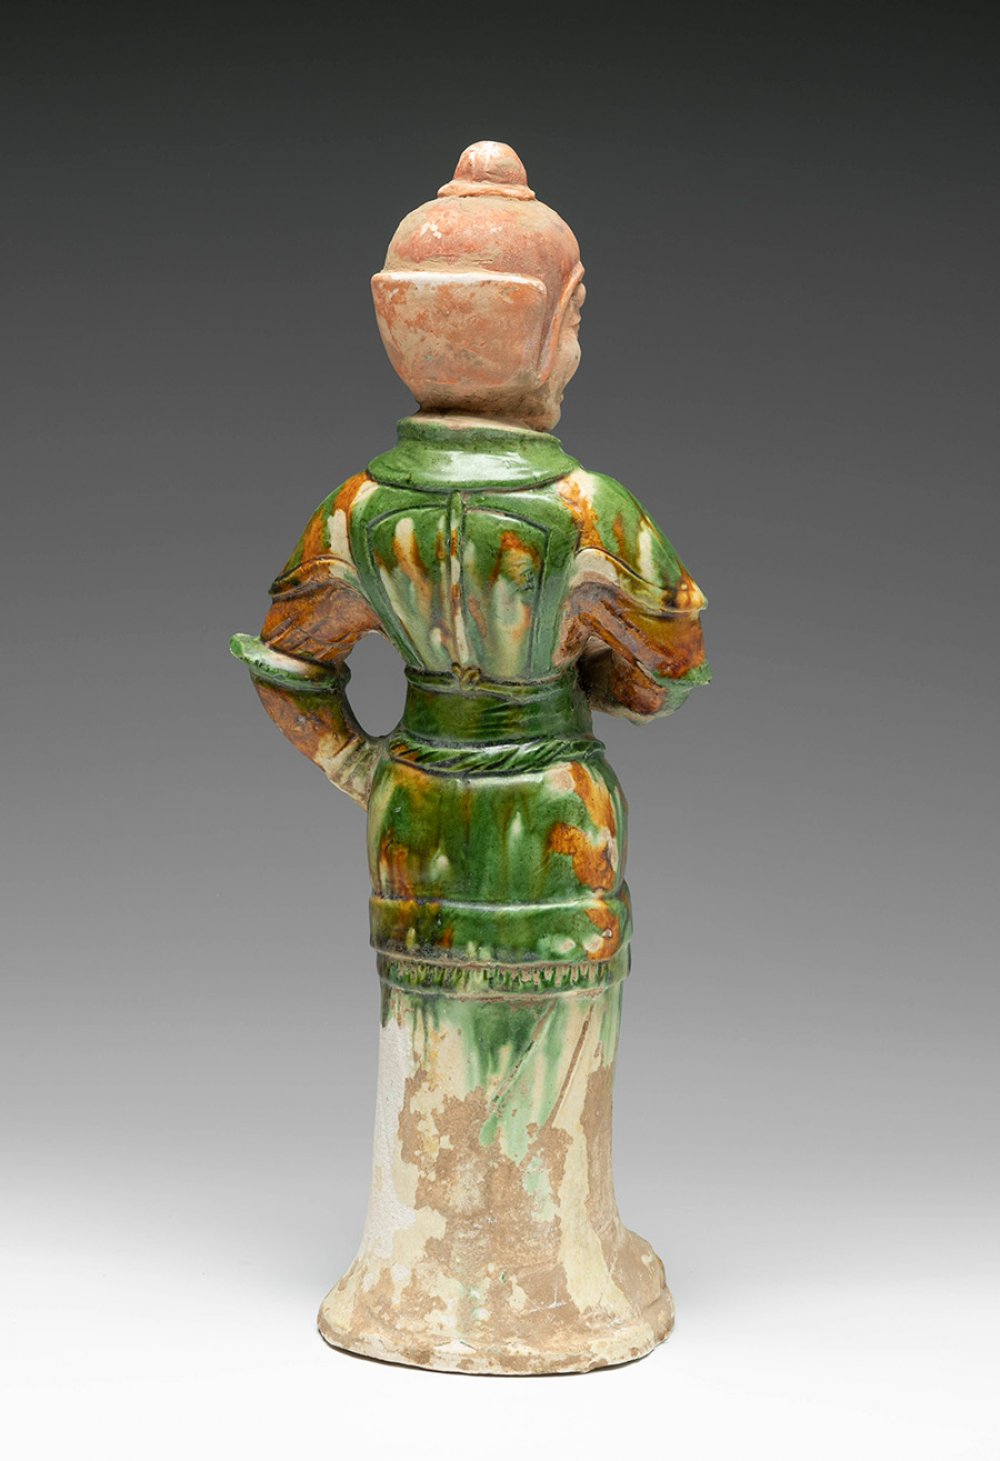 Lokapala; China, Tang dynasty, AD 617 - 907.Terracotta with Sancai glaze.Certificate of analysis - Image 5 of 5